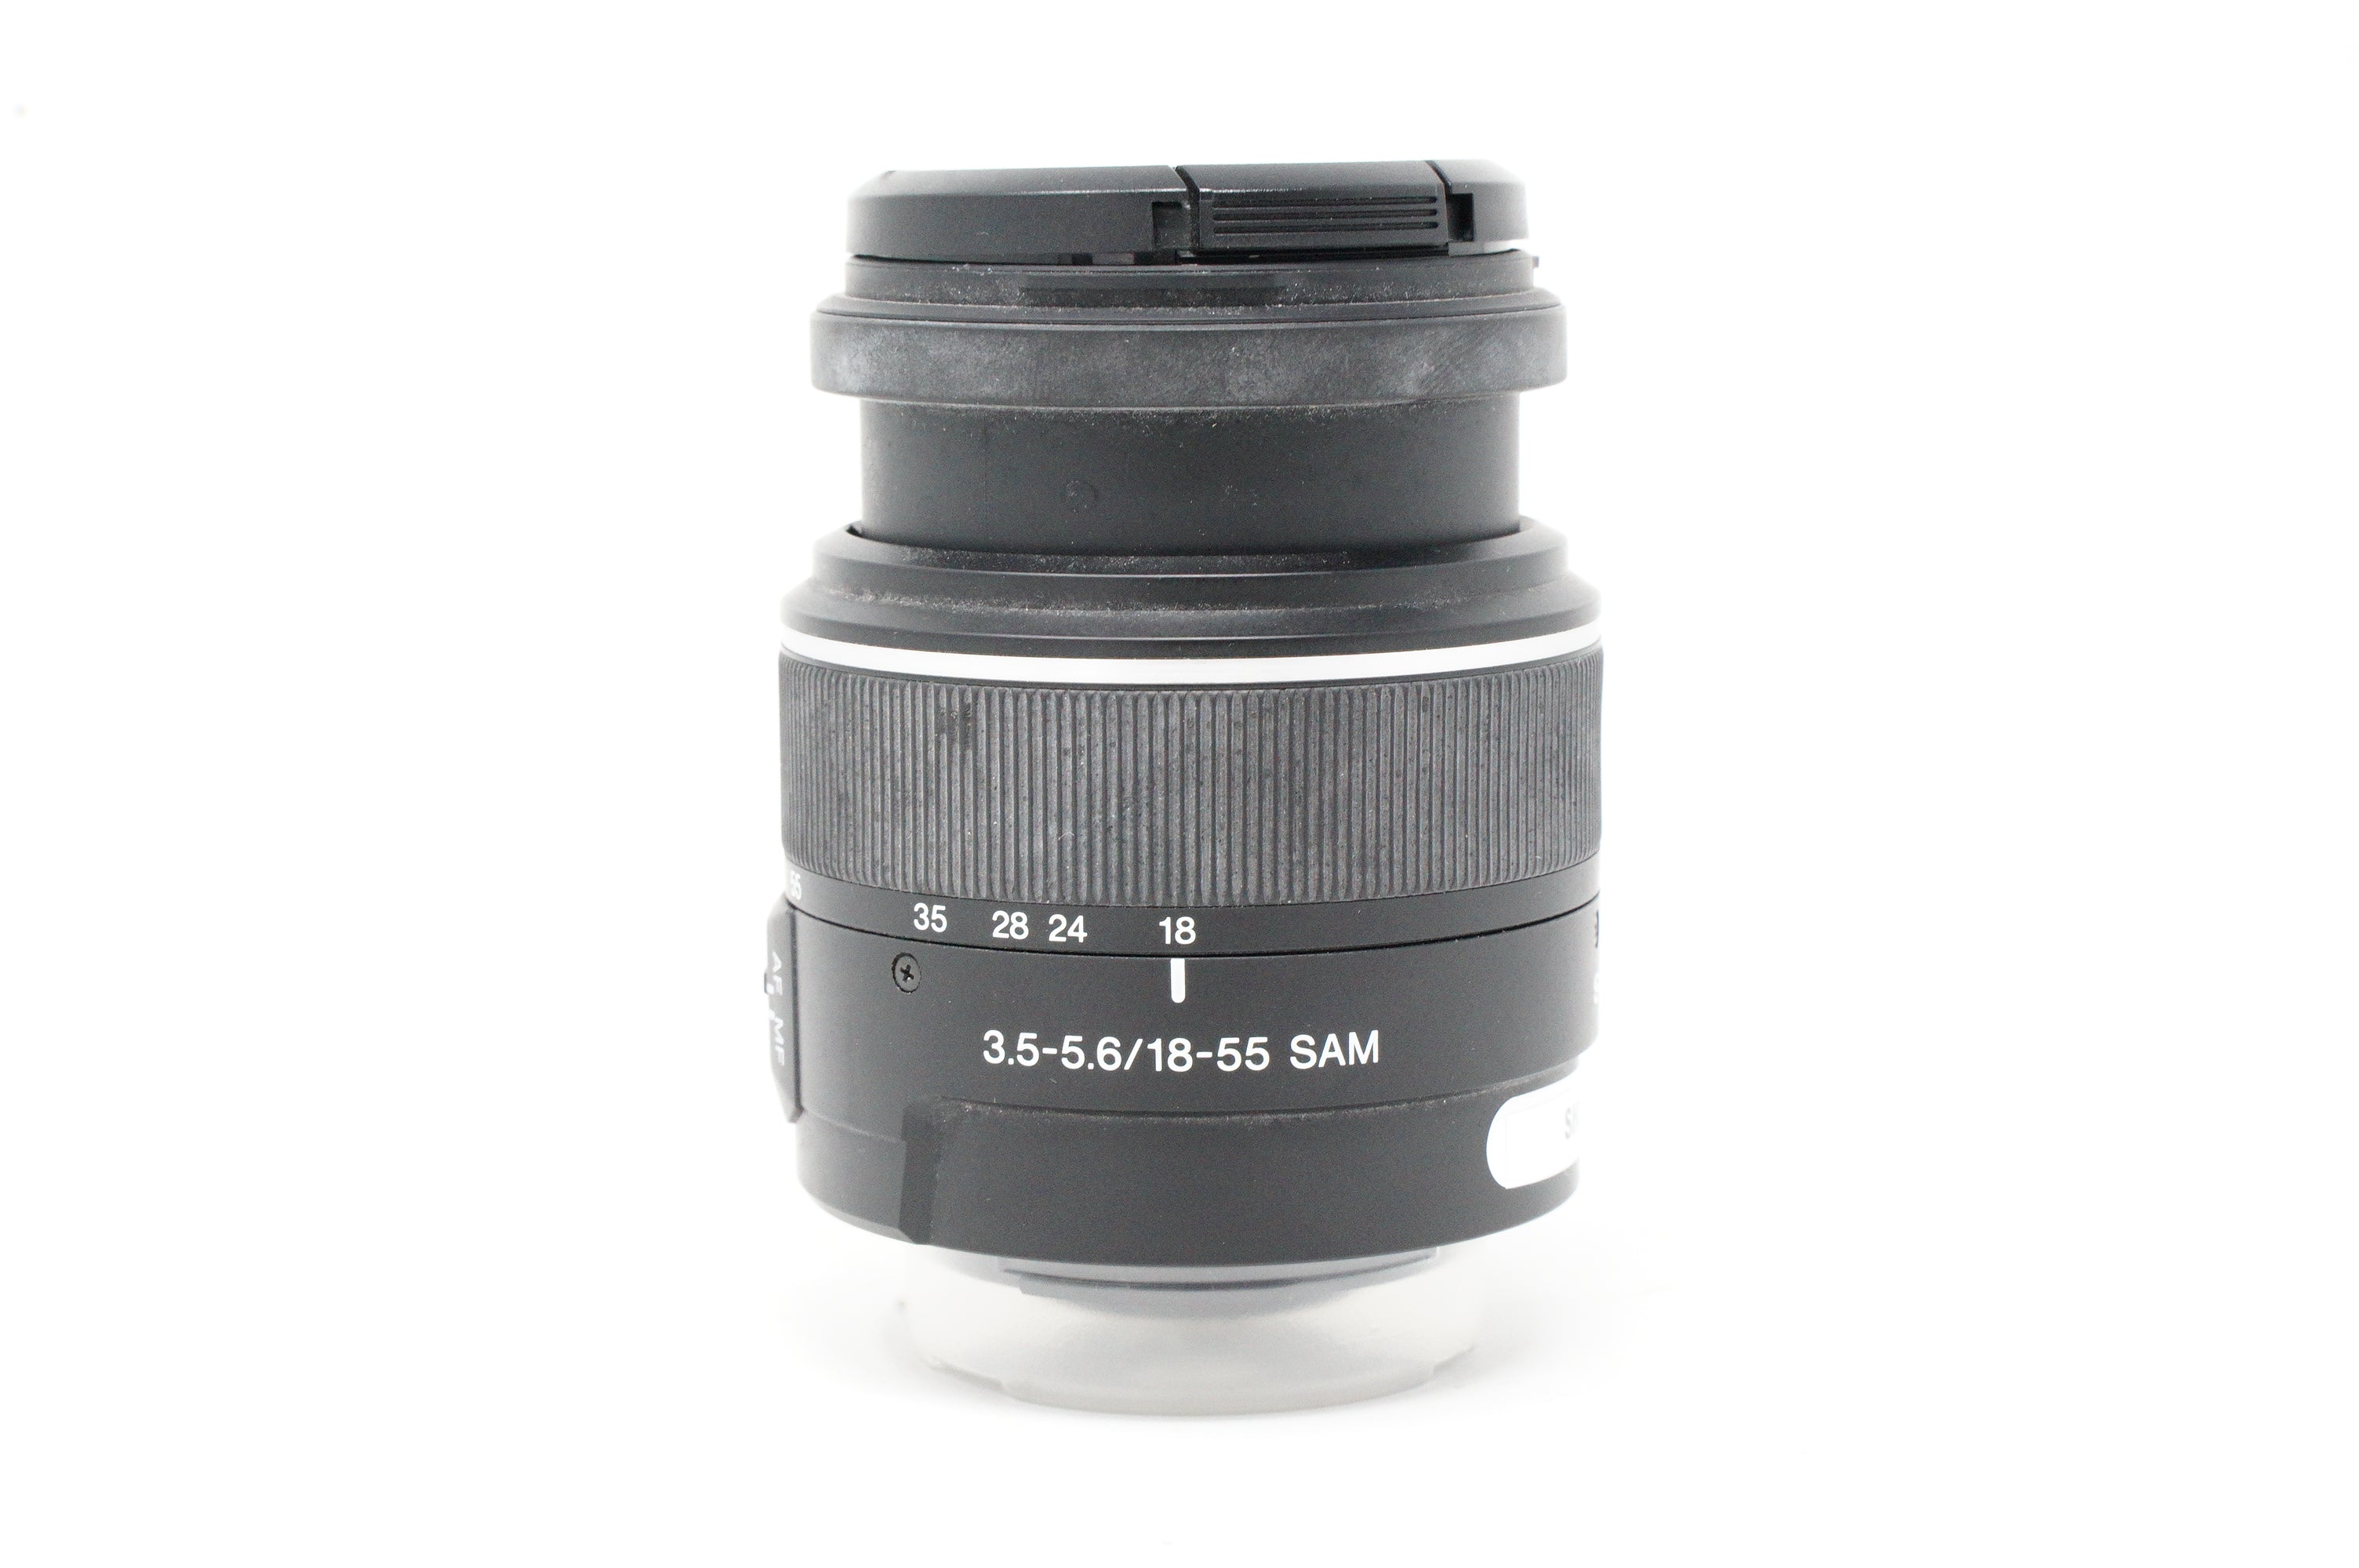 Product Image of Used Sony DT 18-55mm F3.5/5.6 SAM lens for Sony A-mount (SH37836)